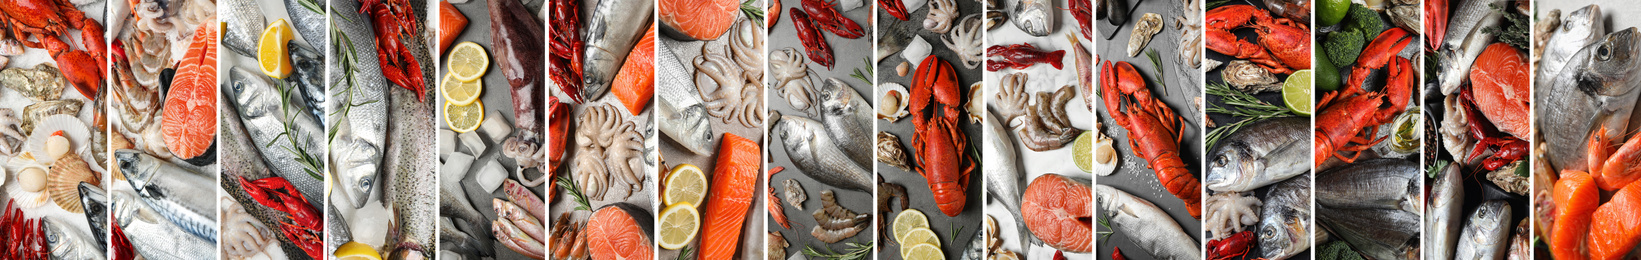 Collage with various fresh fishes and seafood. Banner design 